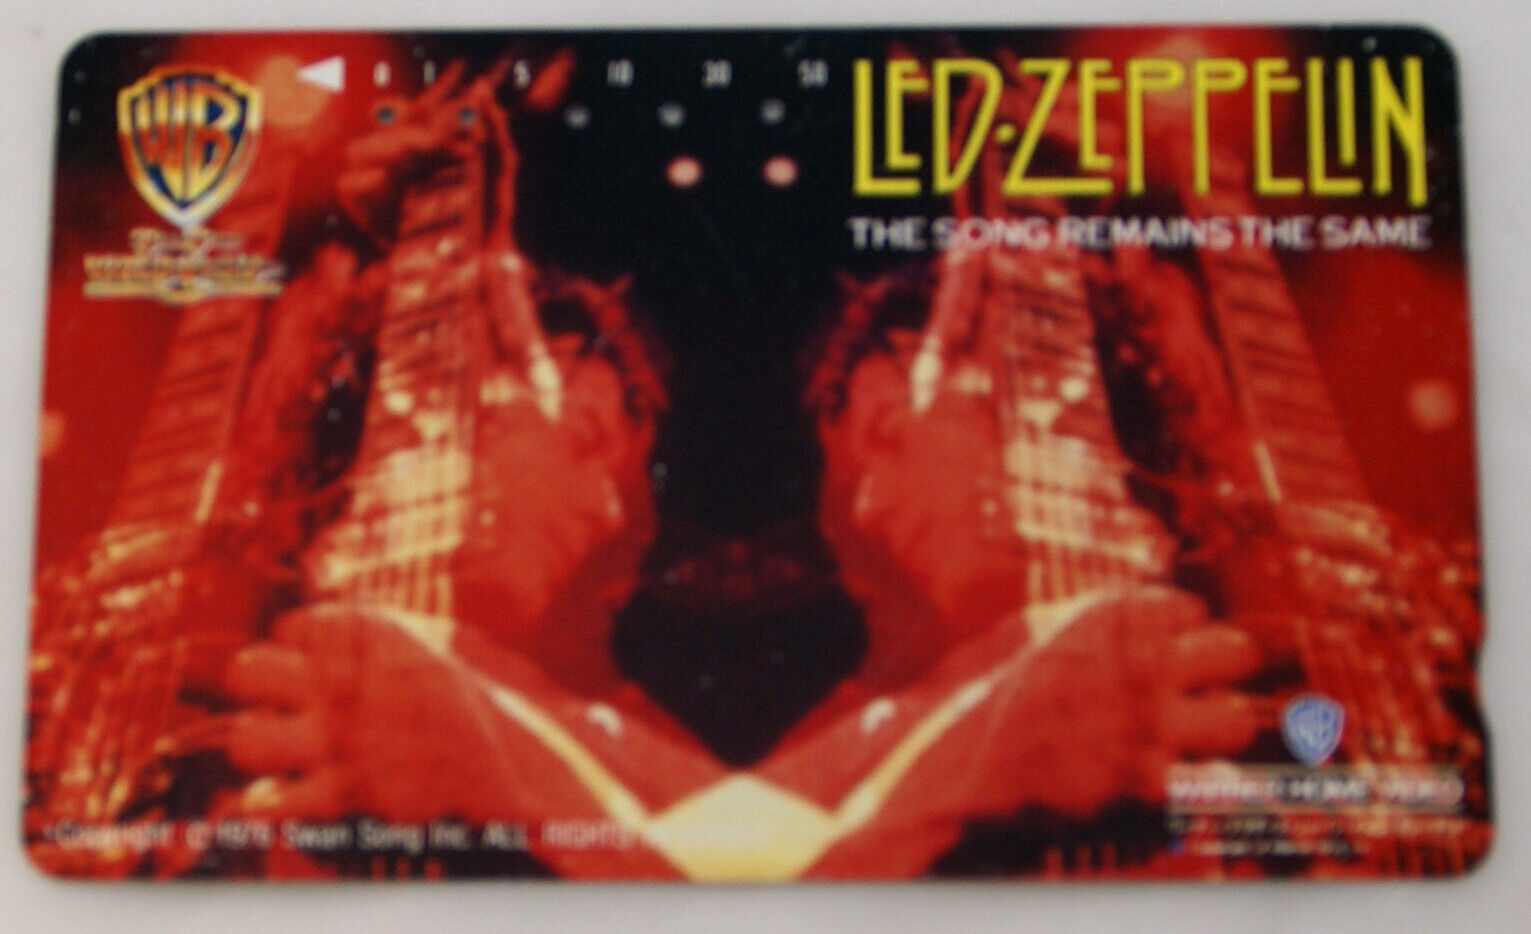 Led Zeppelin Phonecard Warner Brothers Promo Japanese Circa Mid 1980s